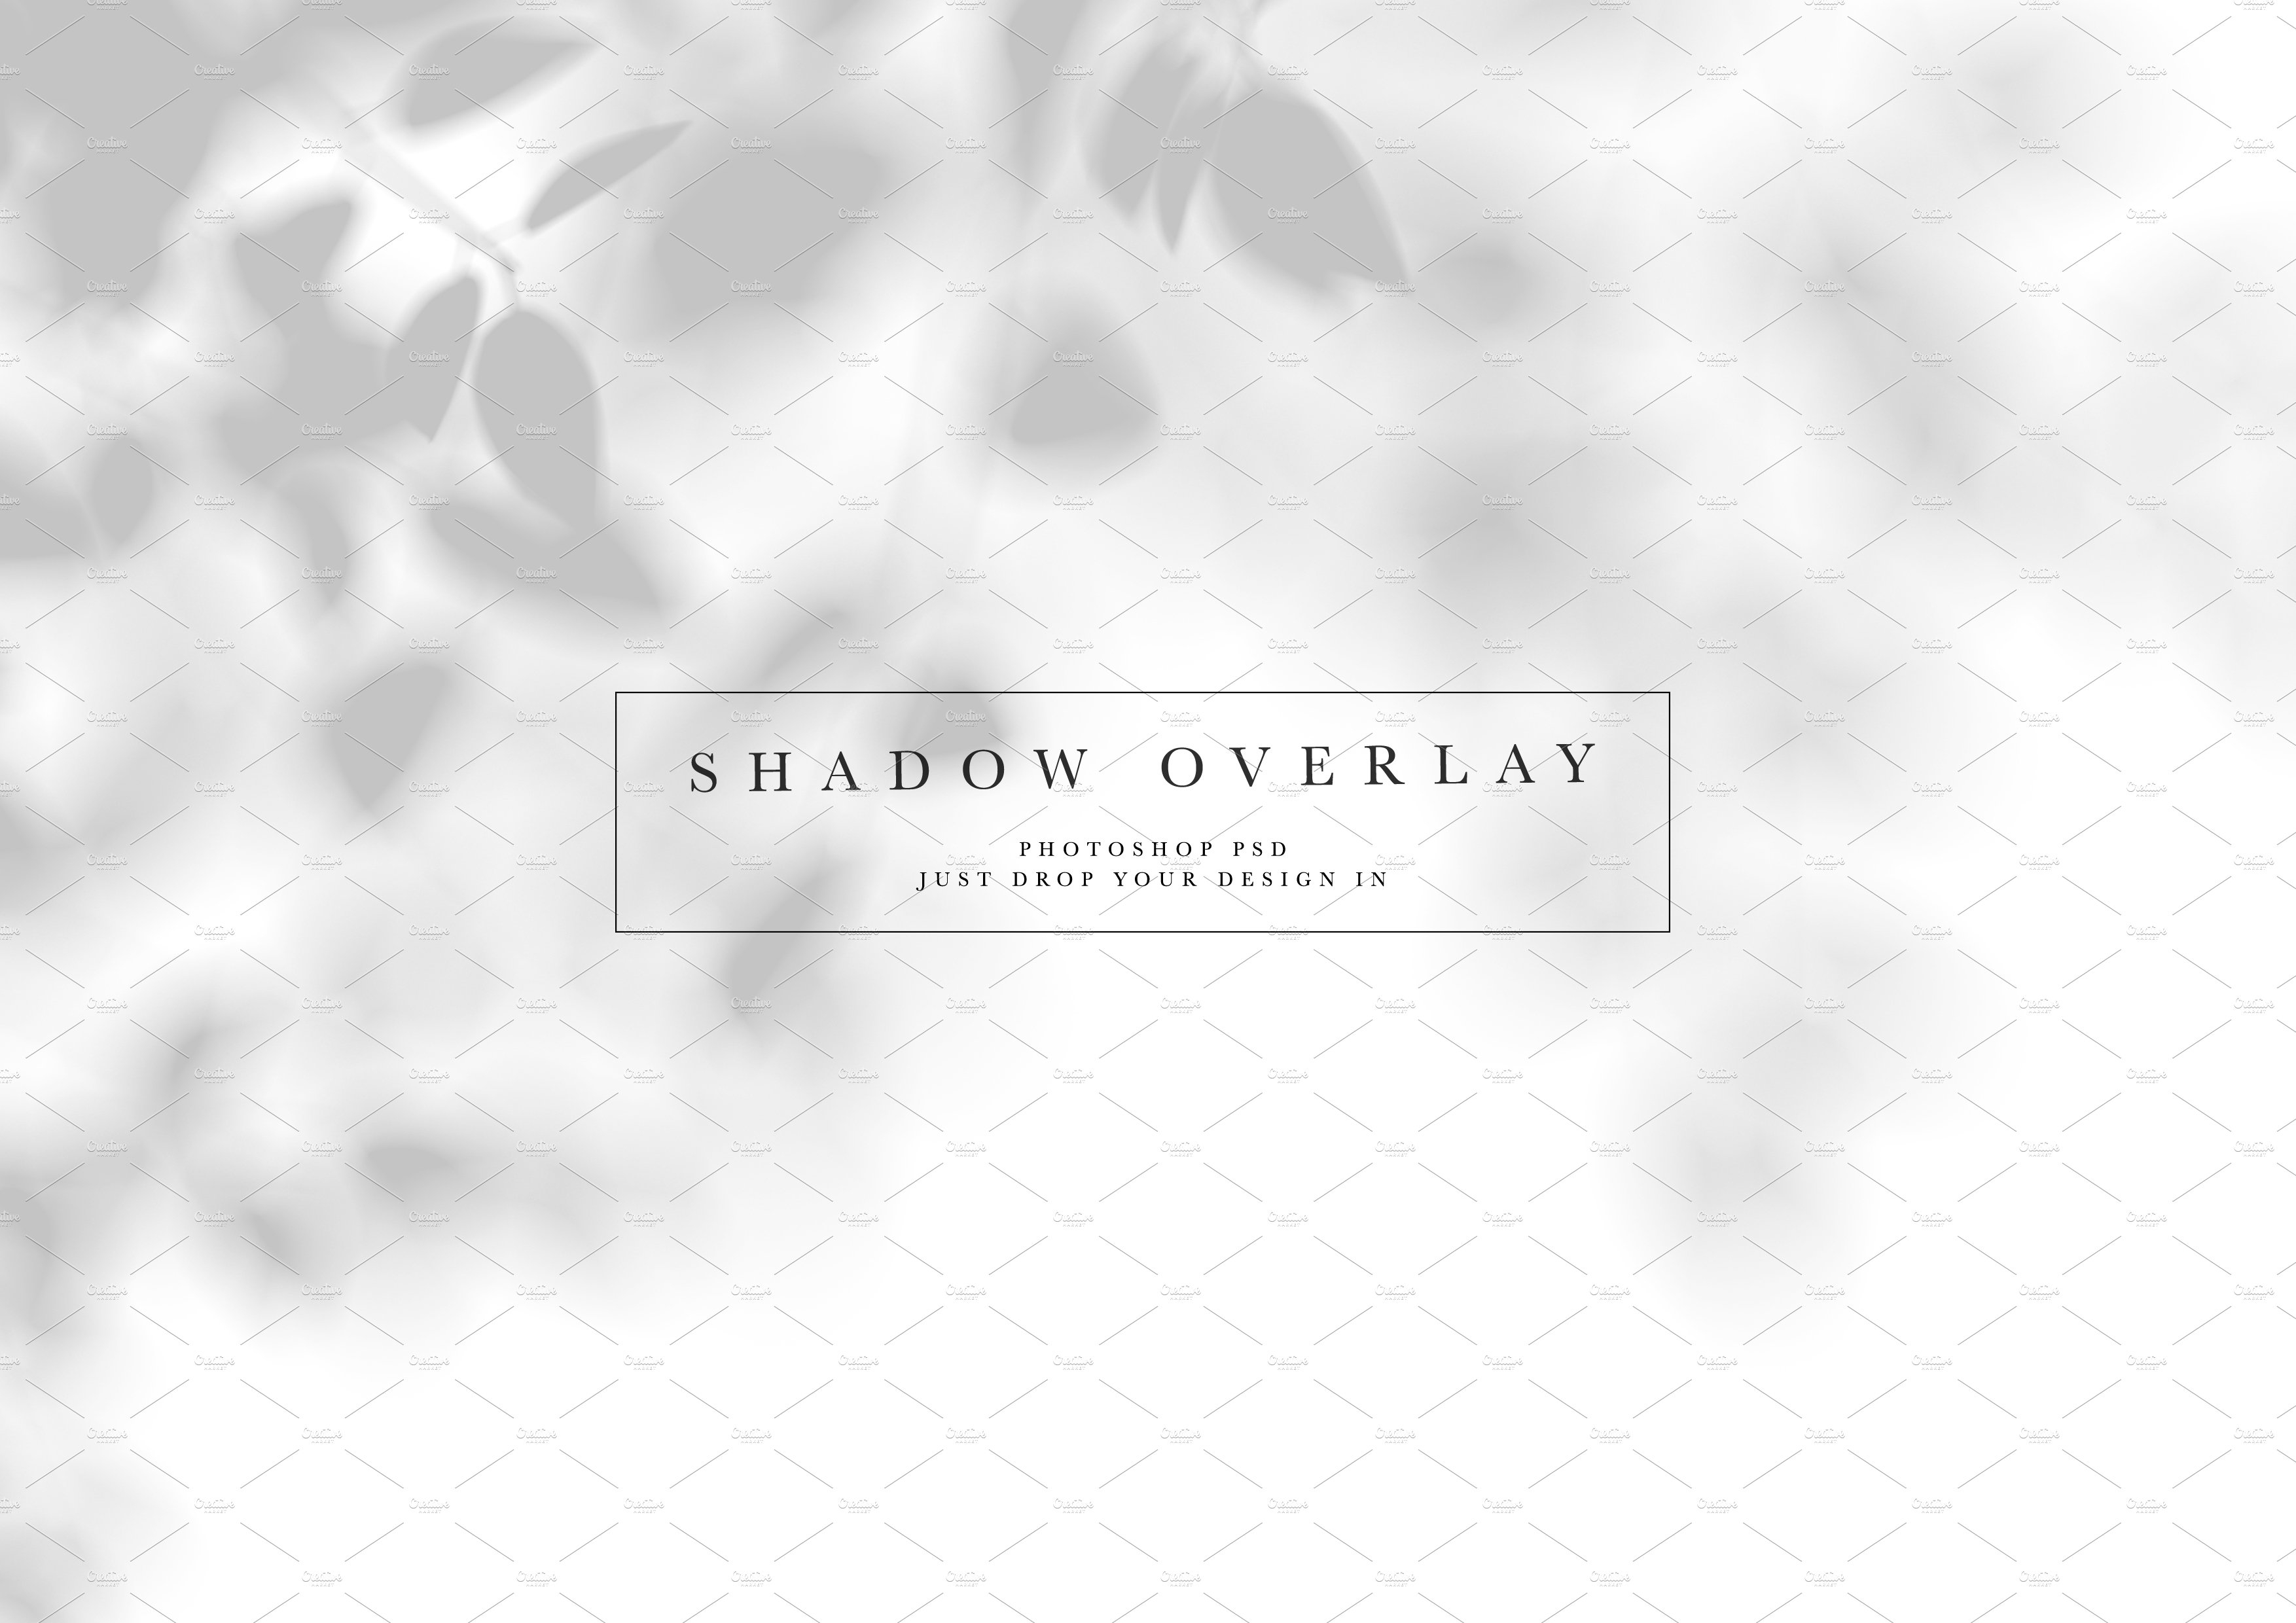 Shadow Overlay #26cover image.